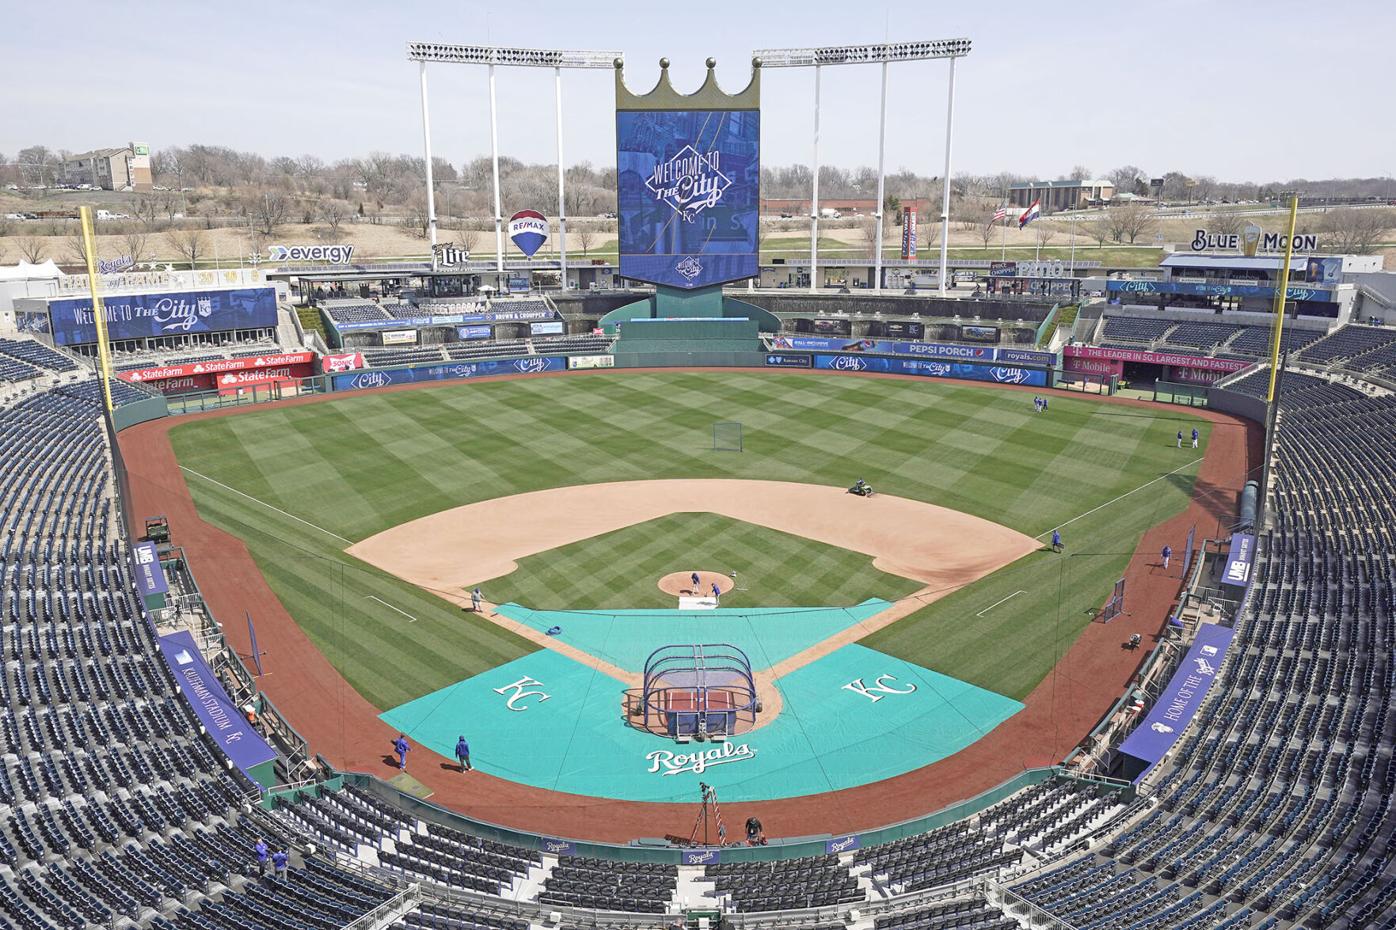 The Royals released renderings for their proposed $2 billion